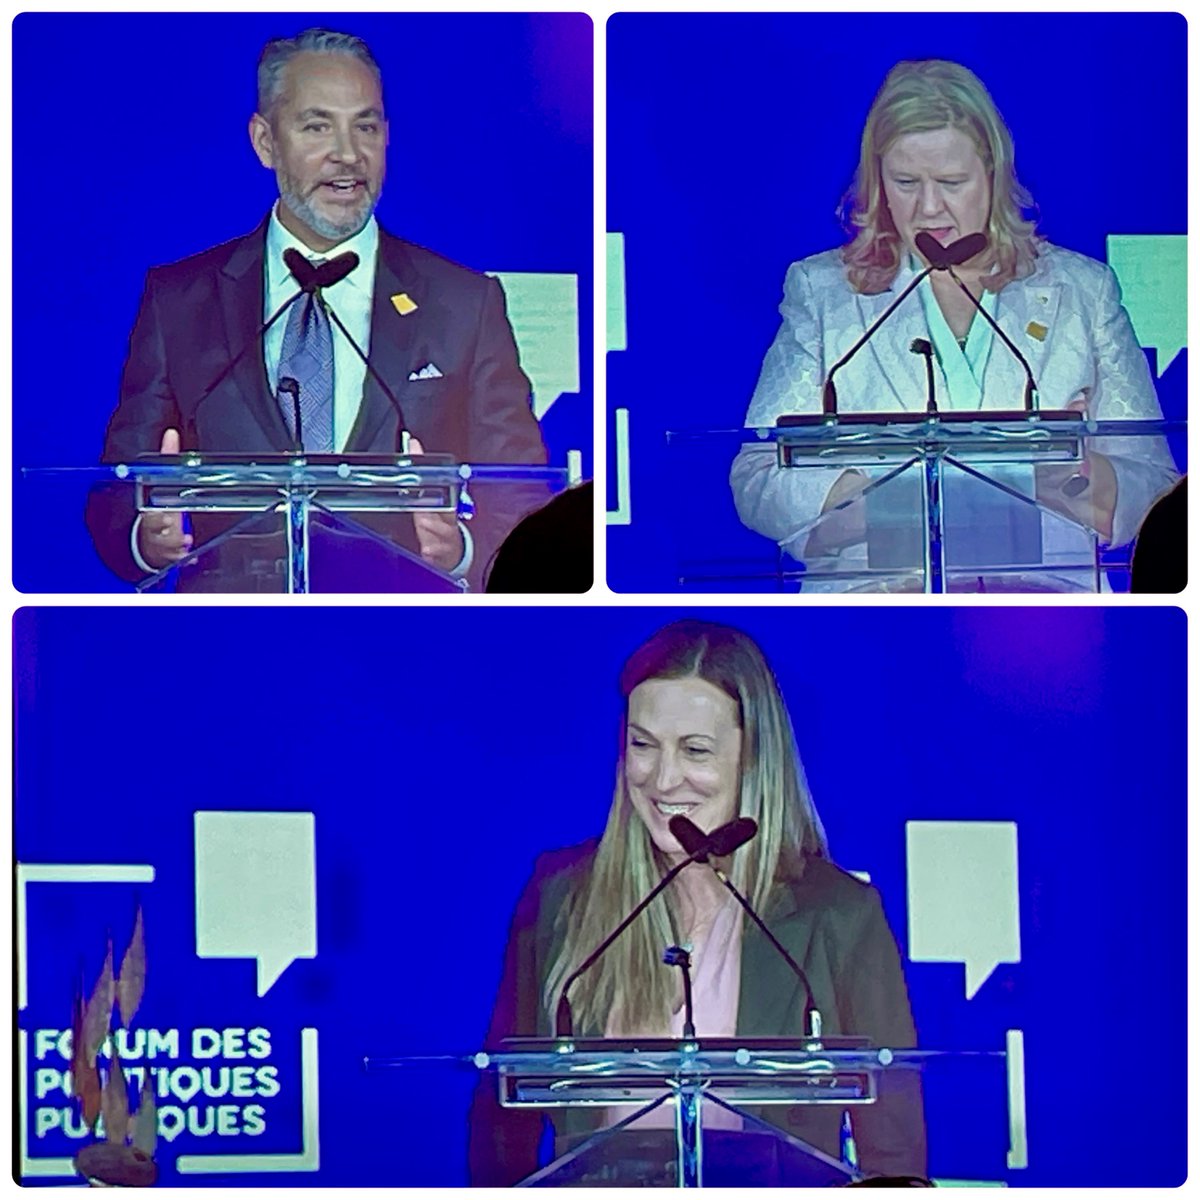 We are honoured to recognise distinguished Canadians who made outstanding contributions to public policy and good governance with respected industry leaders at @ppforumca's Testimonial Dinner Honour Roll in Toronto. #publicpolicy